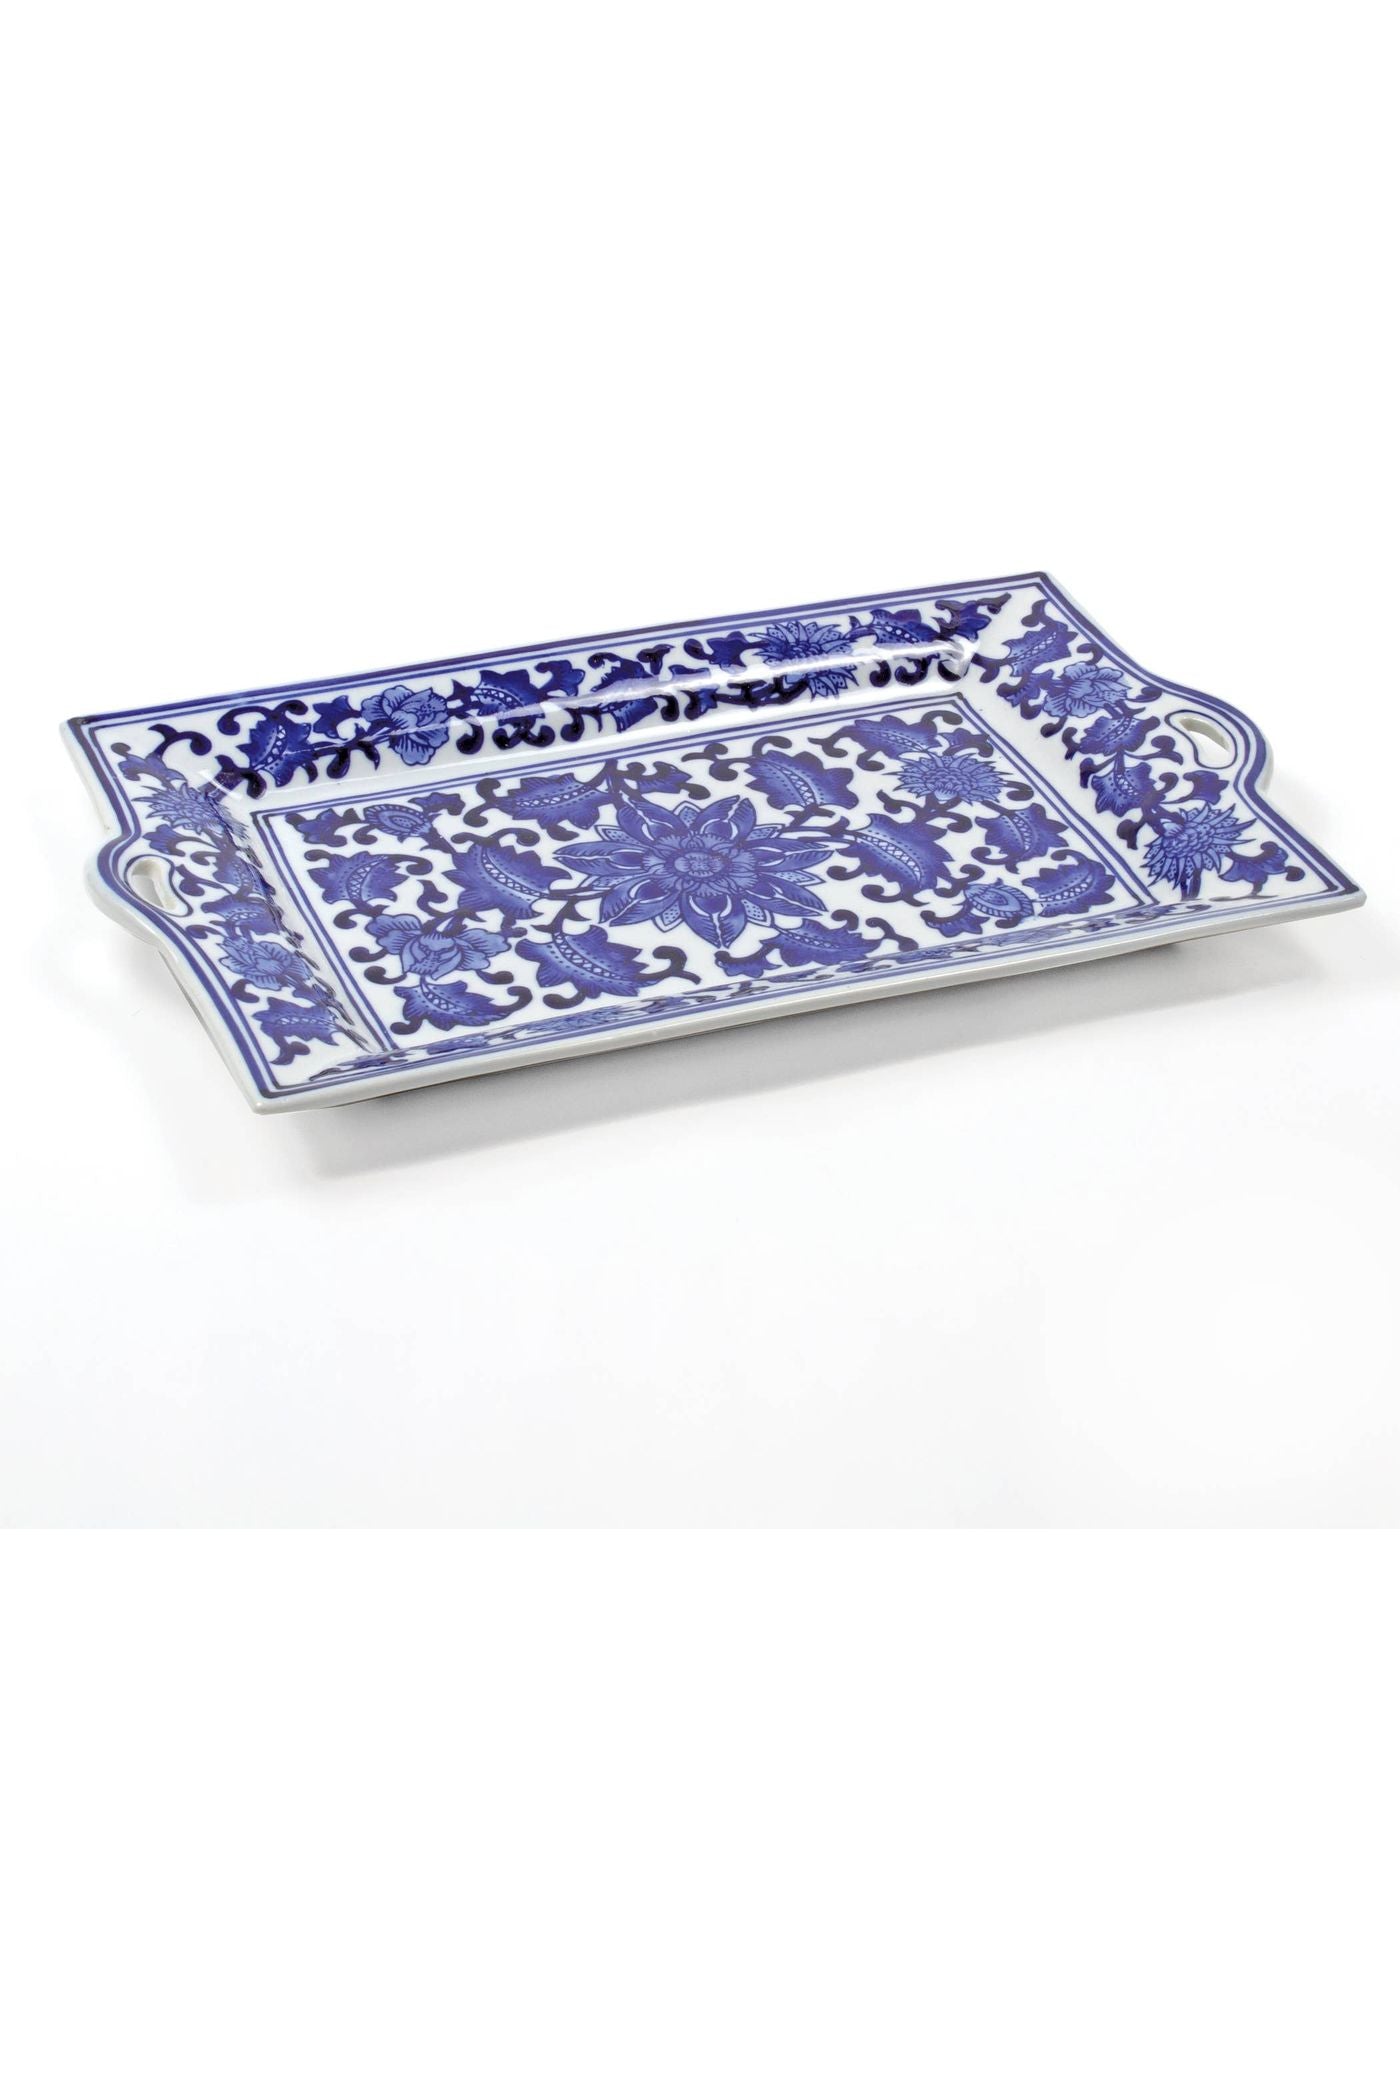 Blue Chinoiserie Charcuterie Tray